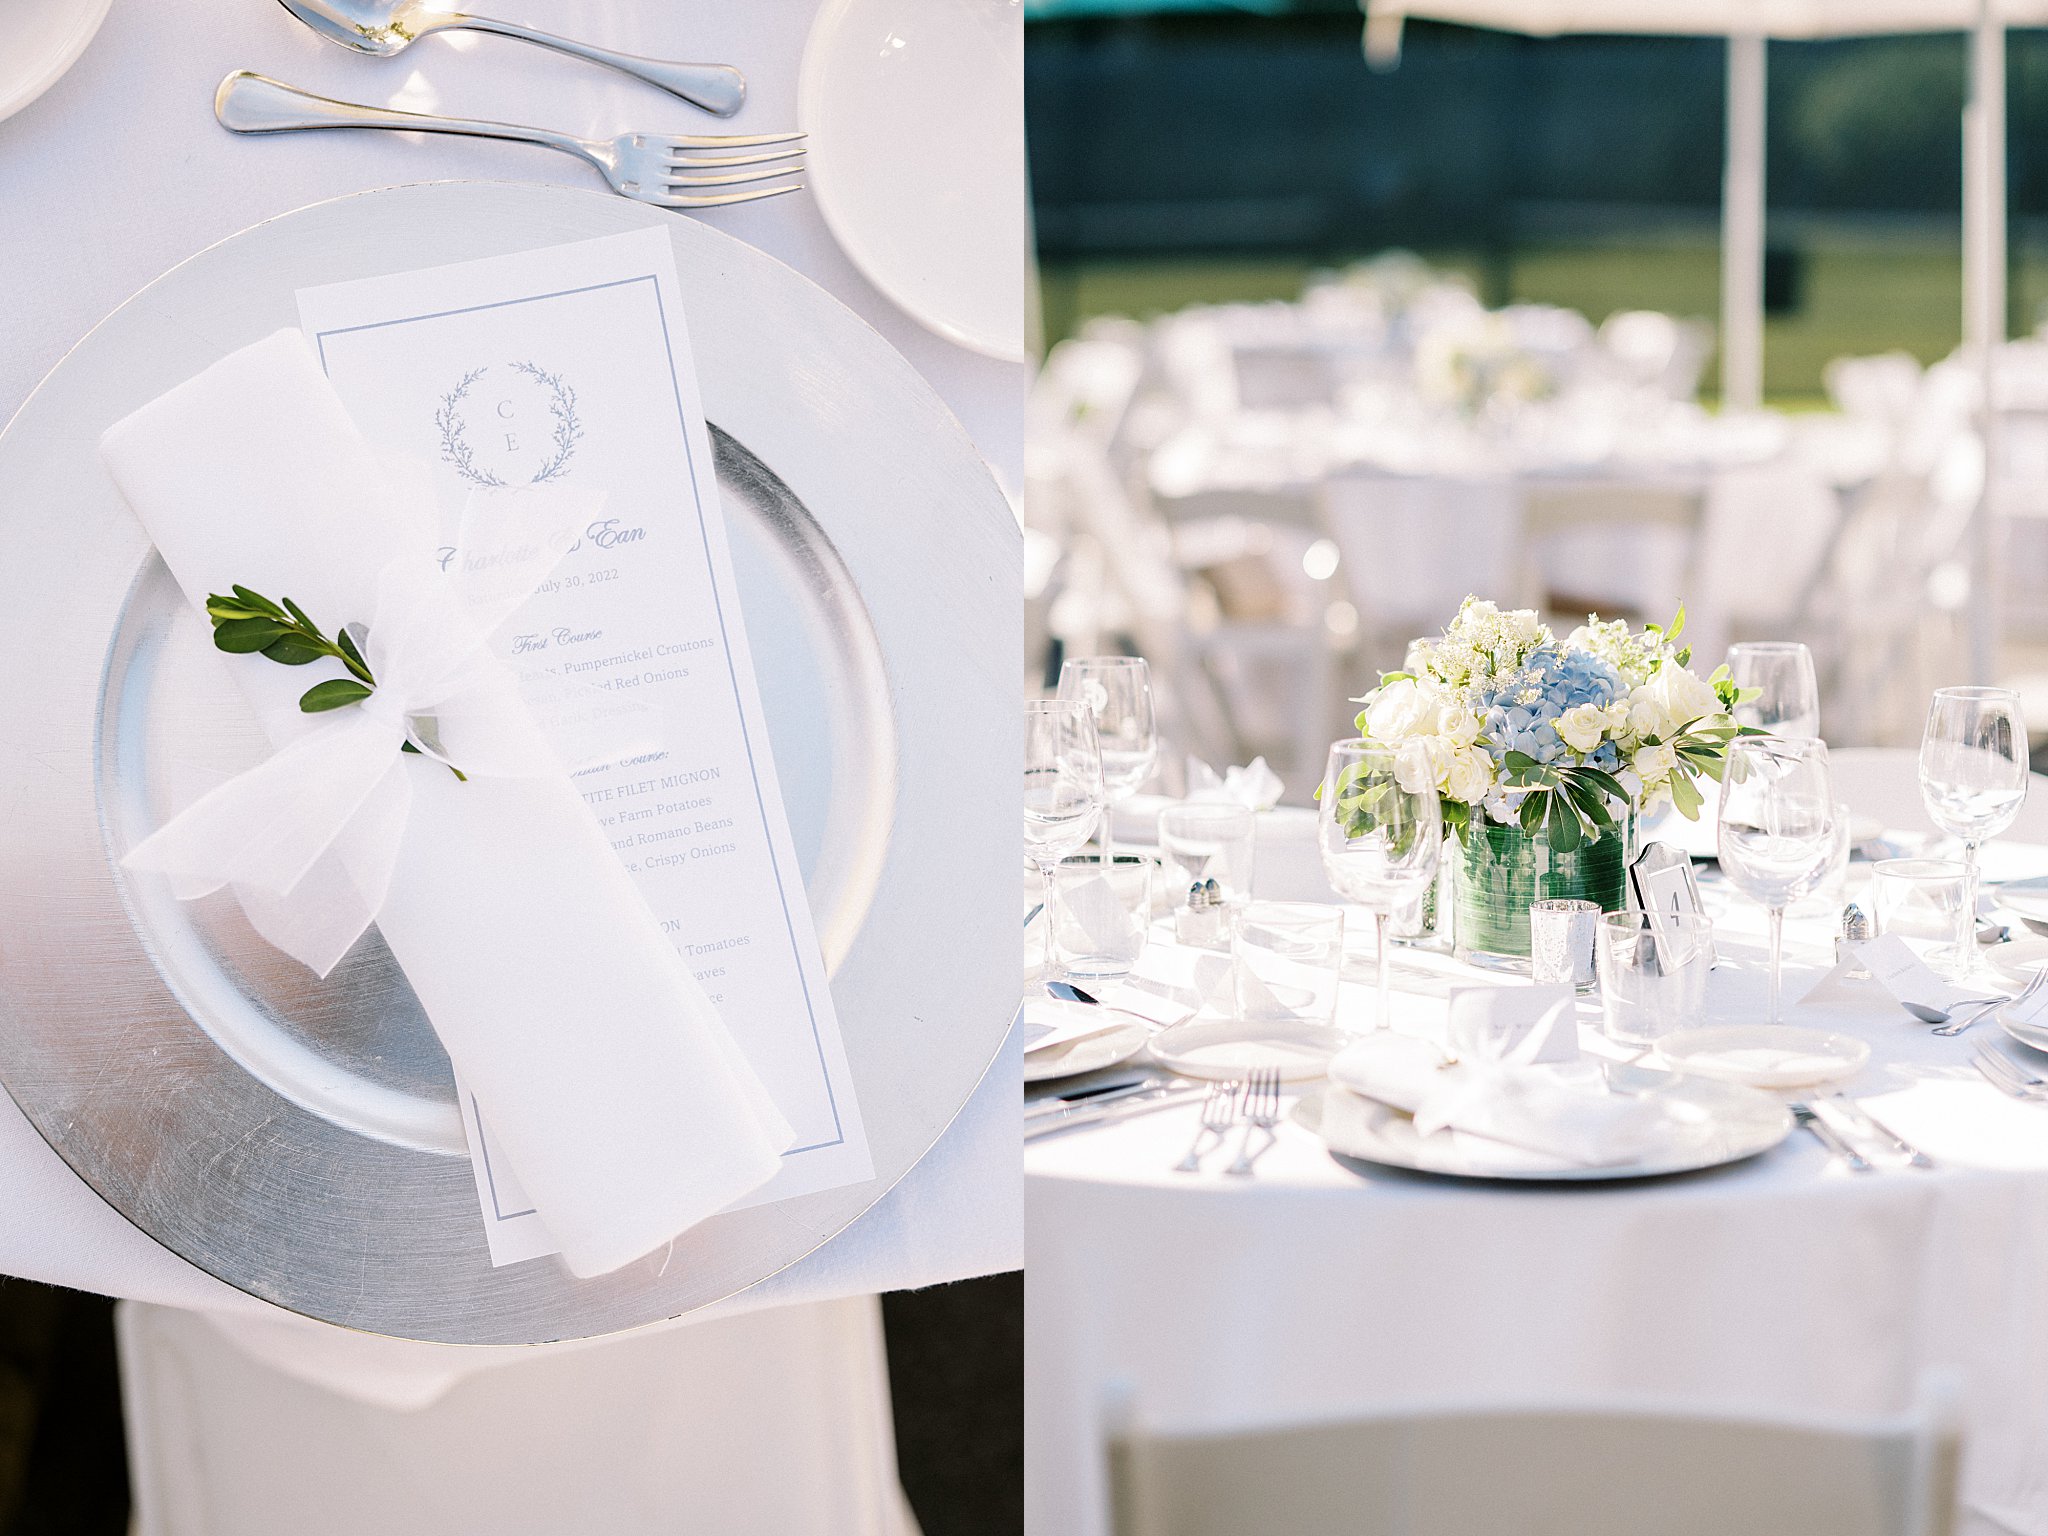 custom menus sit atop plates at reception by Lynne Reznick Photography 